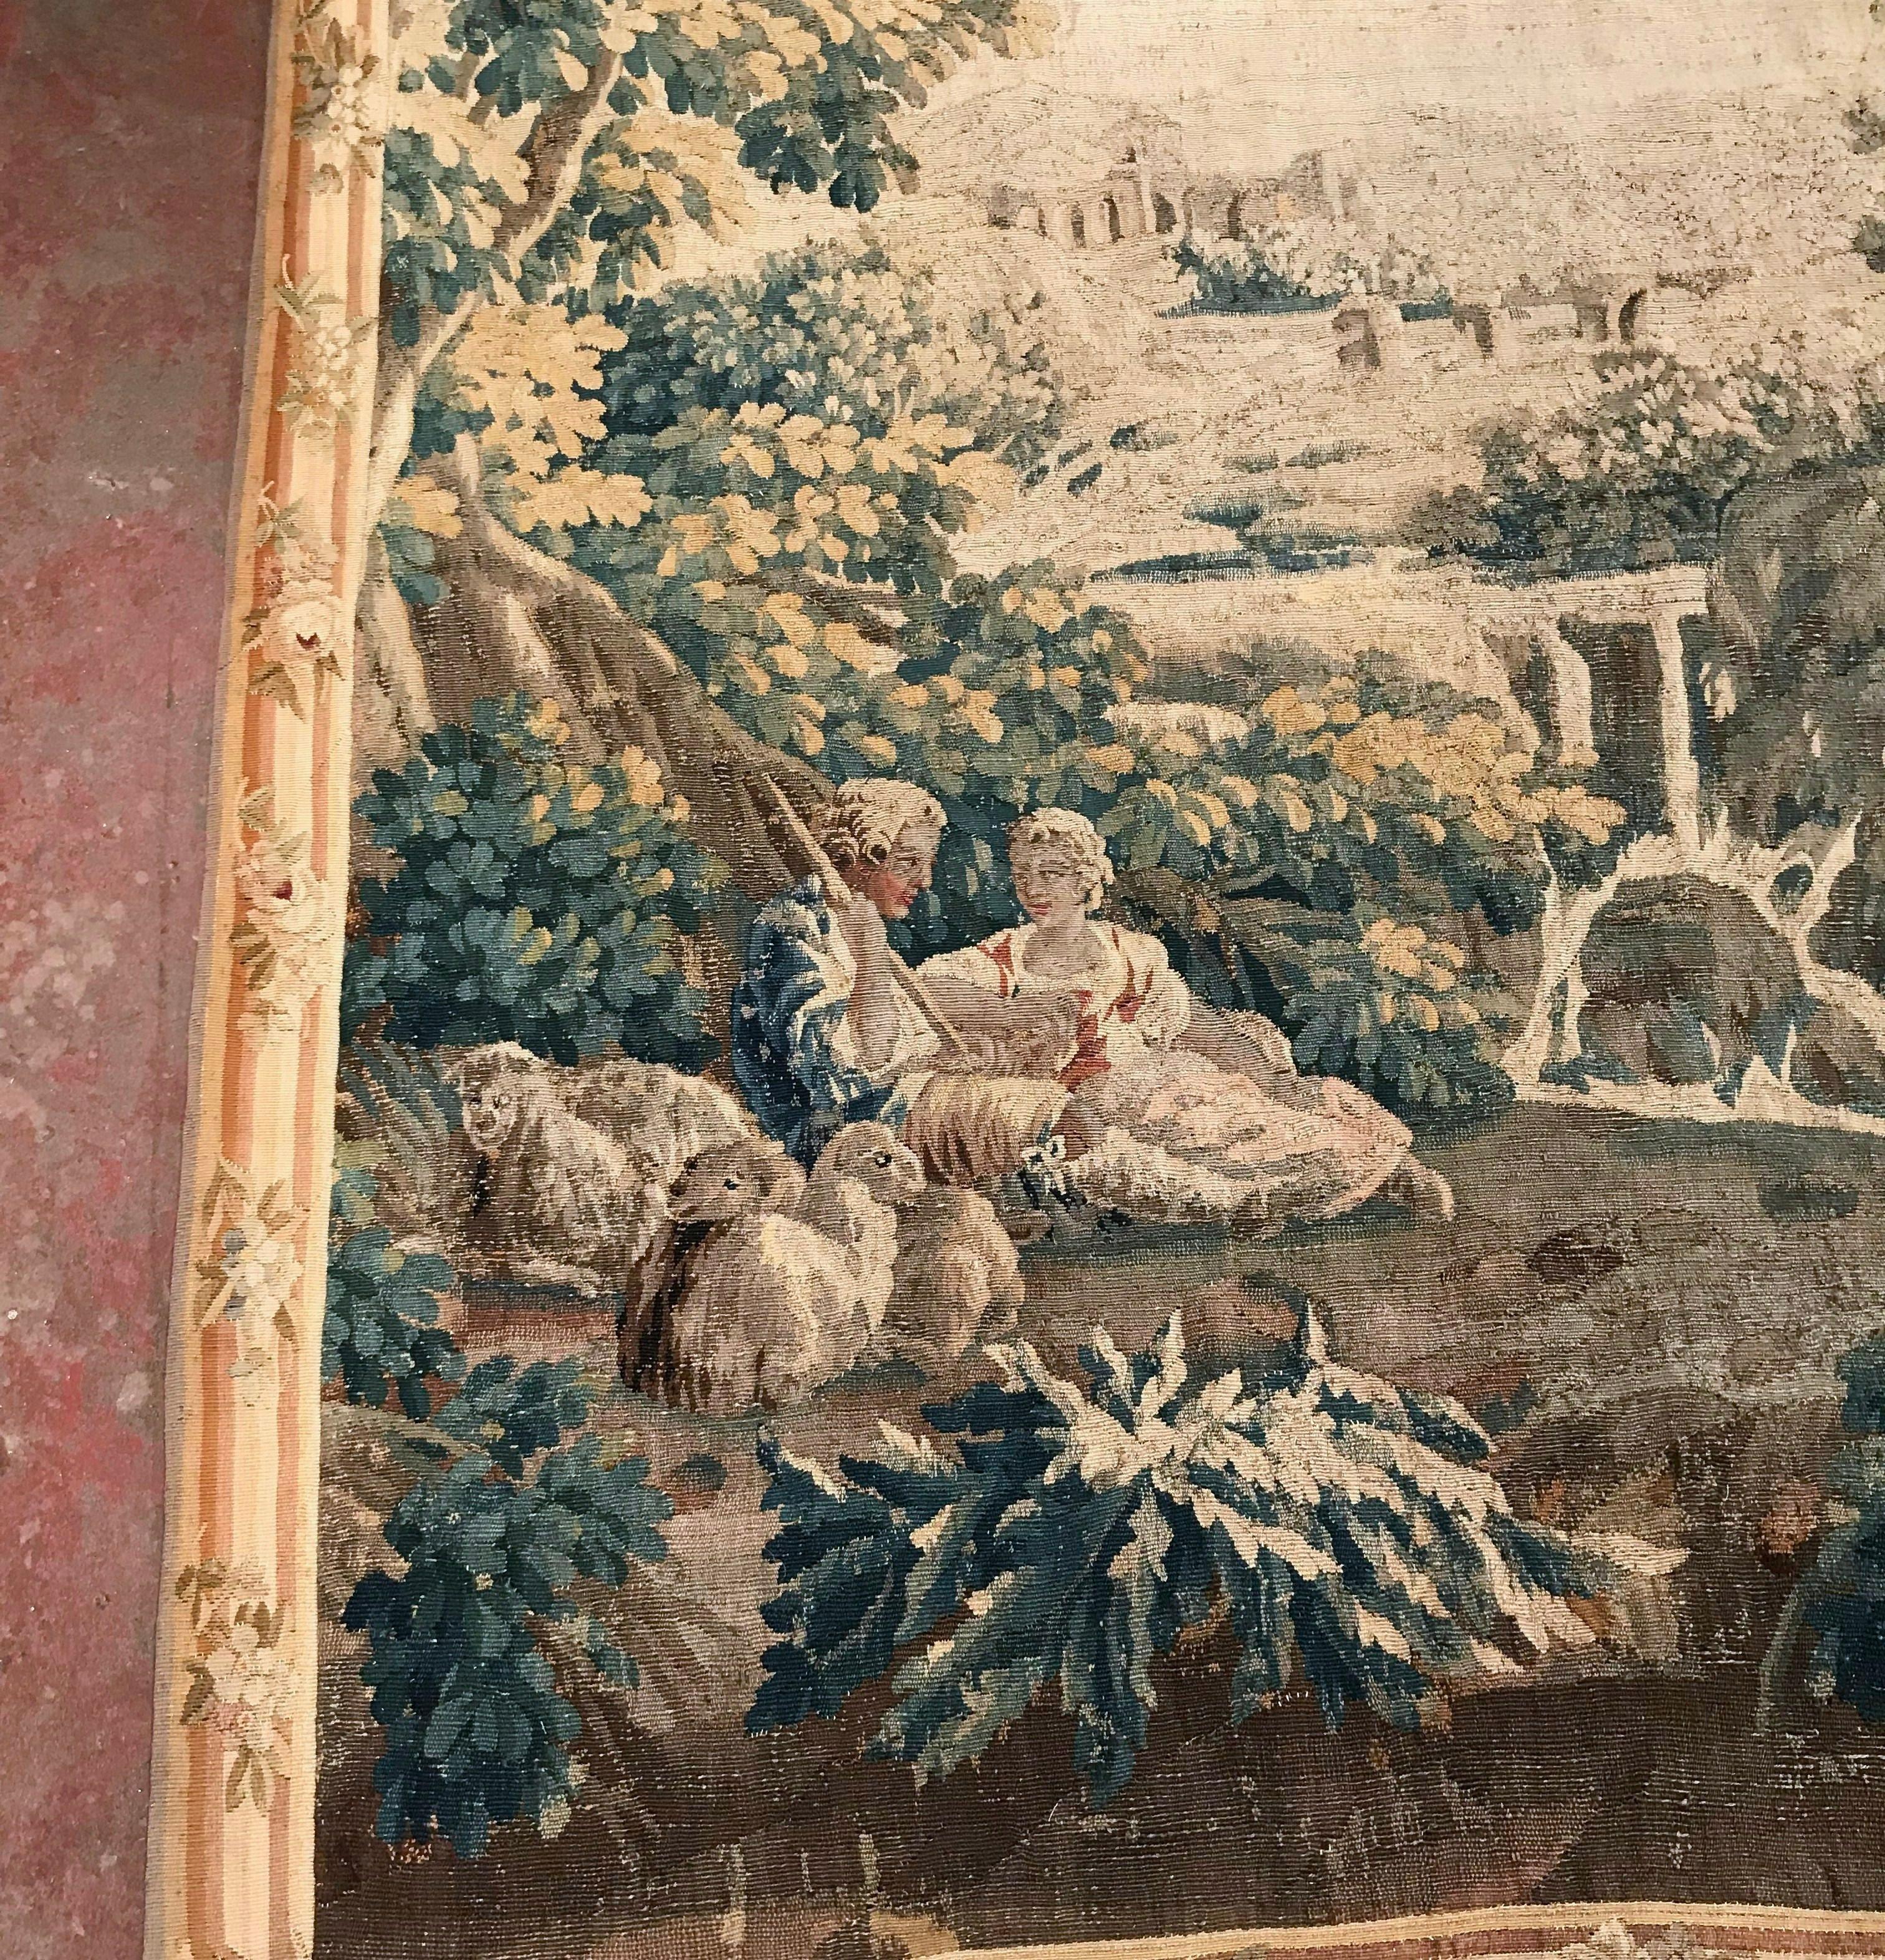 Make a statement in your home with this large antique tapestry from France. Handwoven in Aubusson in the style of Boucher, circa 1750, this wall hanging piece depicts a peaceful pastoral scene that includes on the left side, a young shepherd